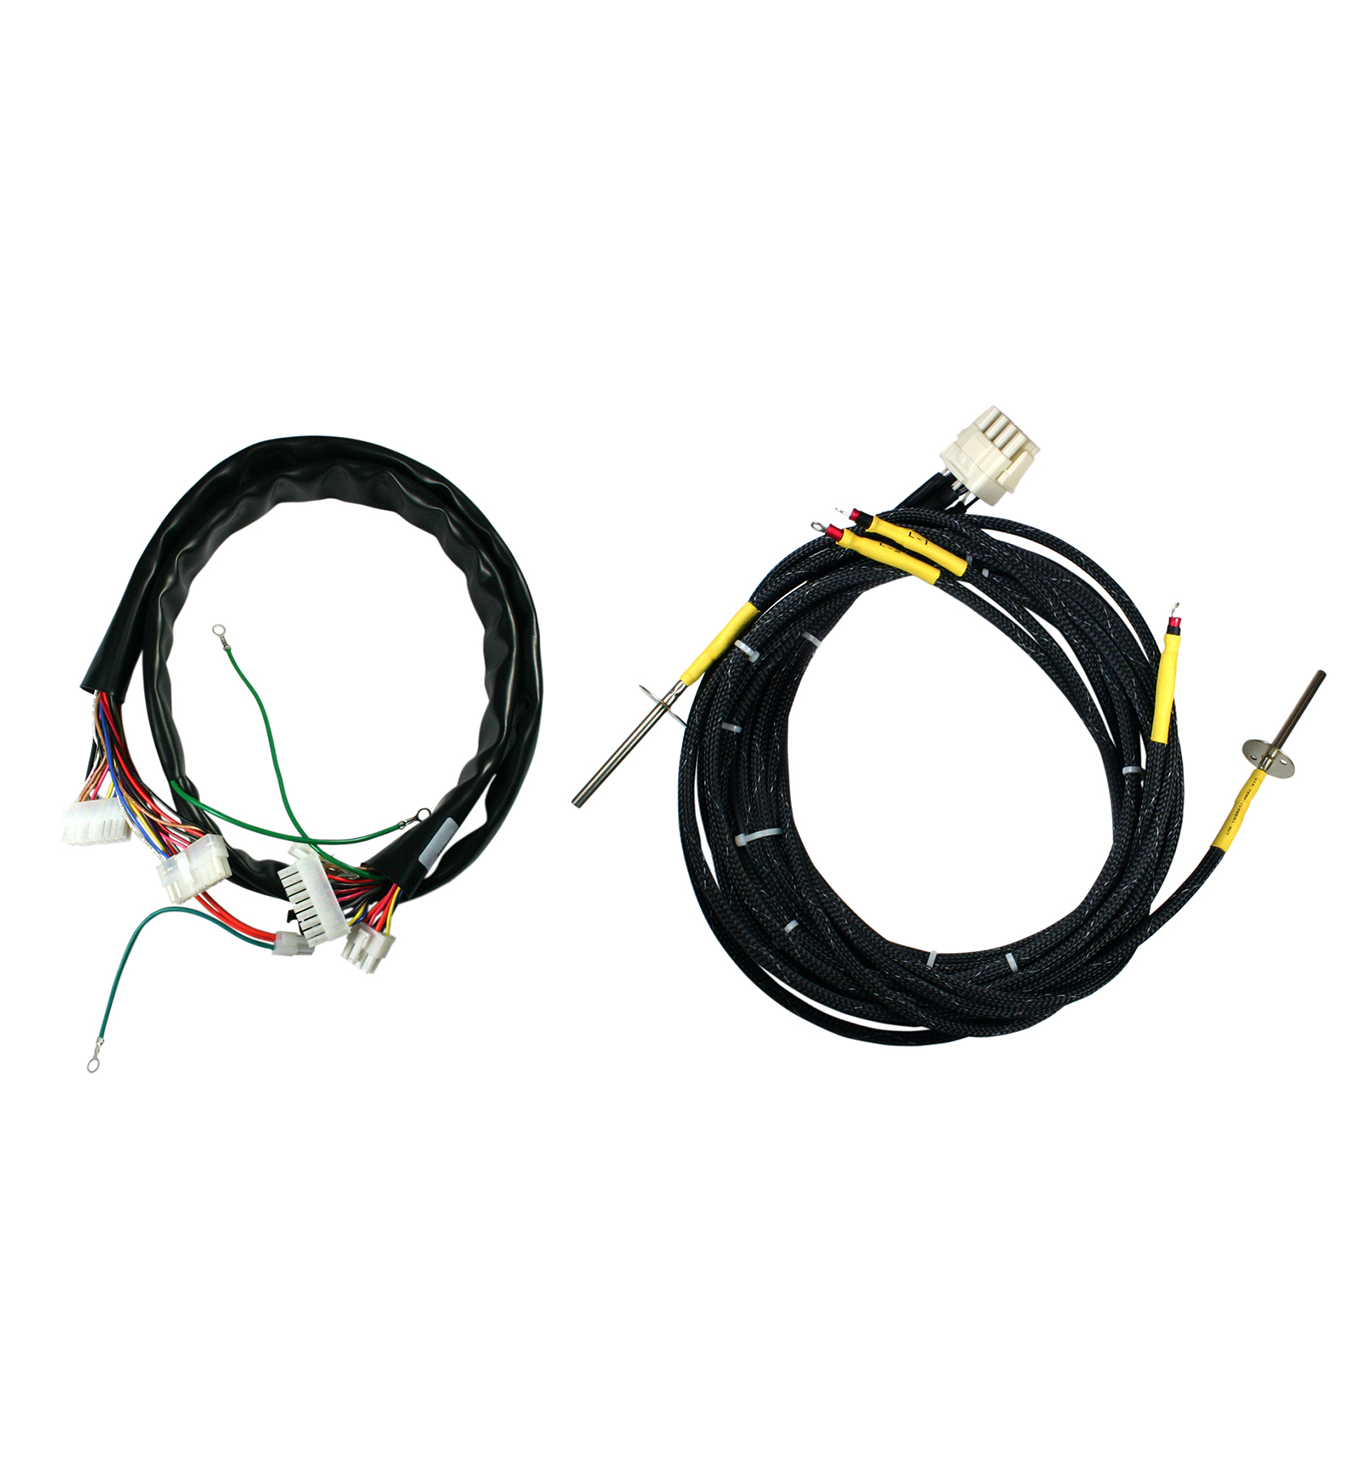 Cable and wire harness